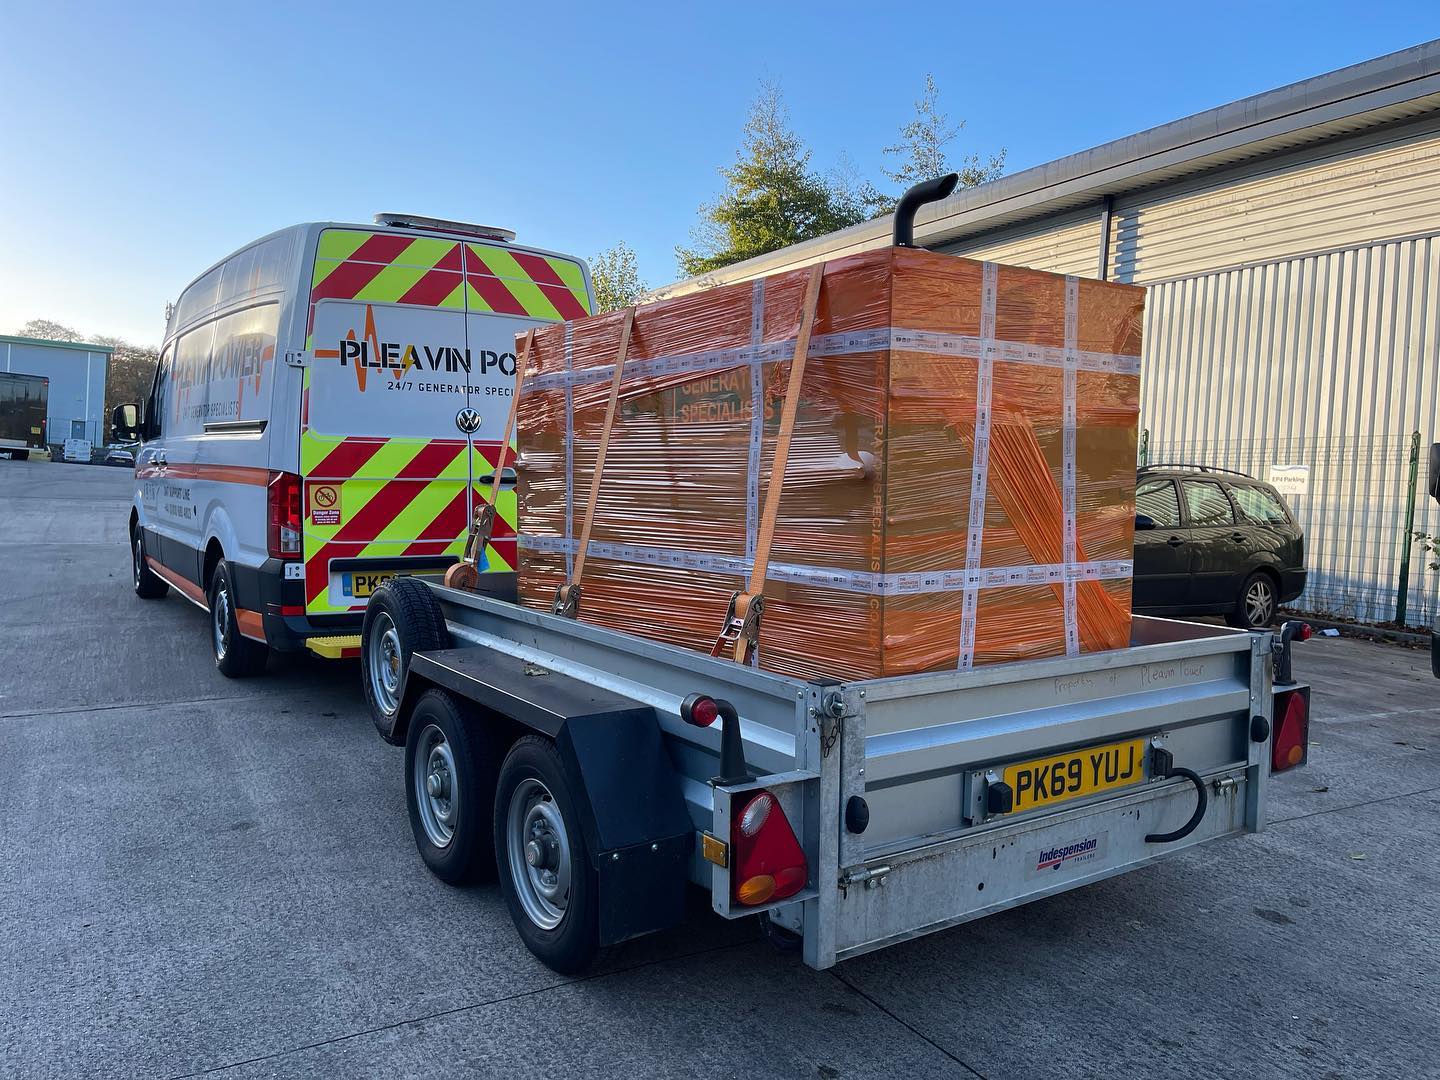 A pleavin Power van transporting a generator for one of their jobs